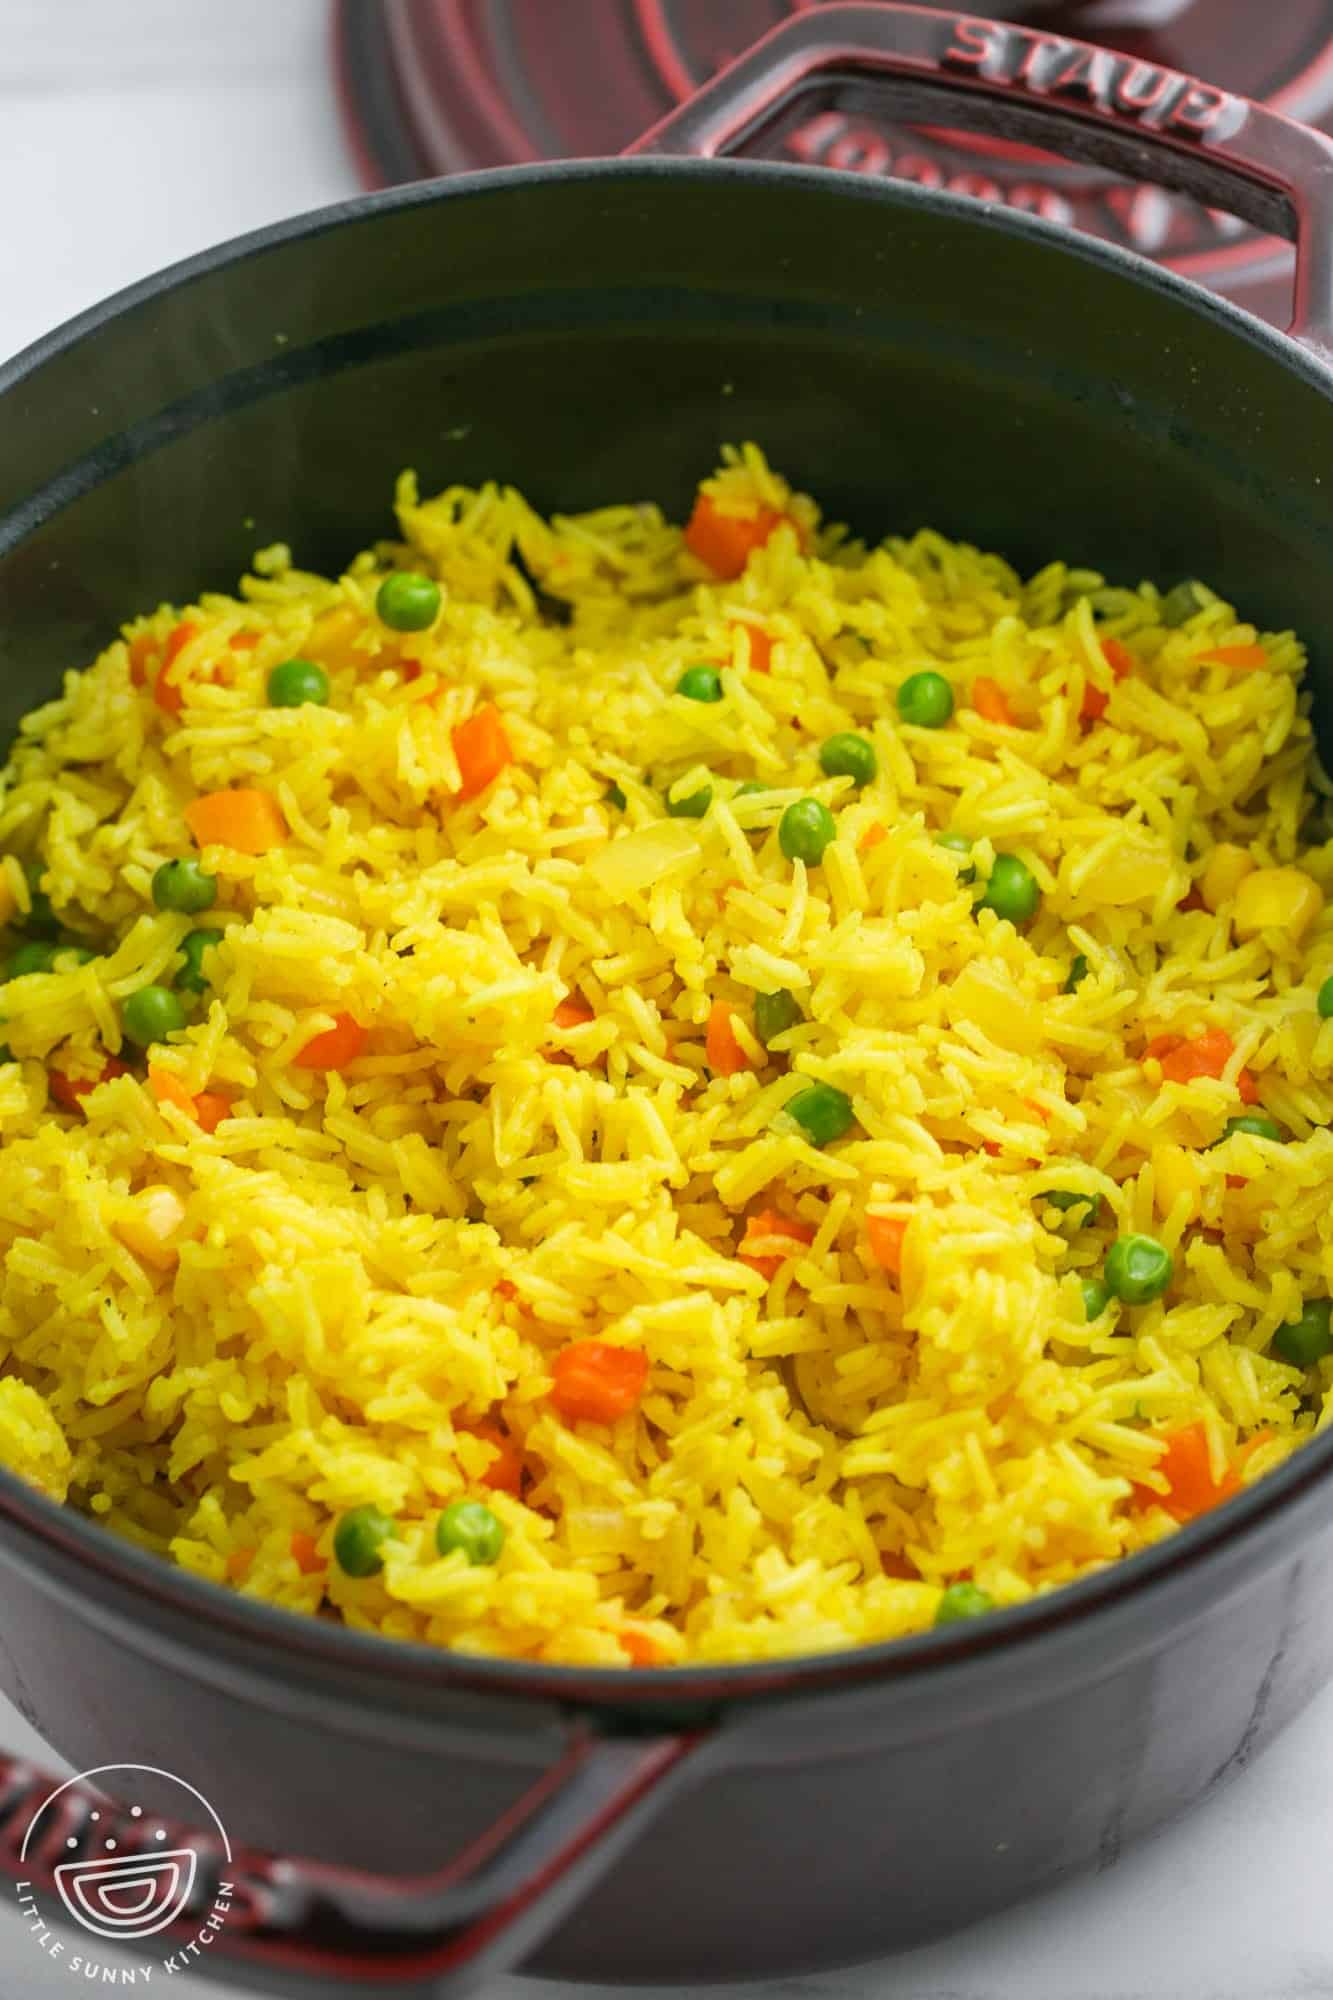 a large saucepan of yellow rice with vegetables.